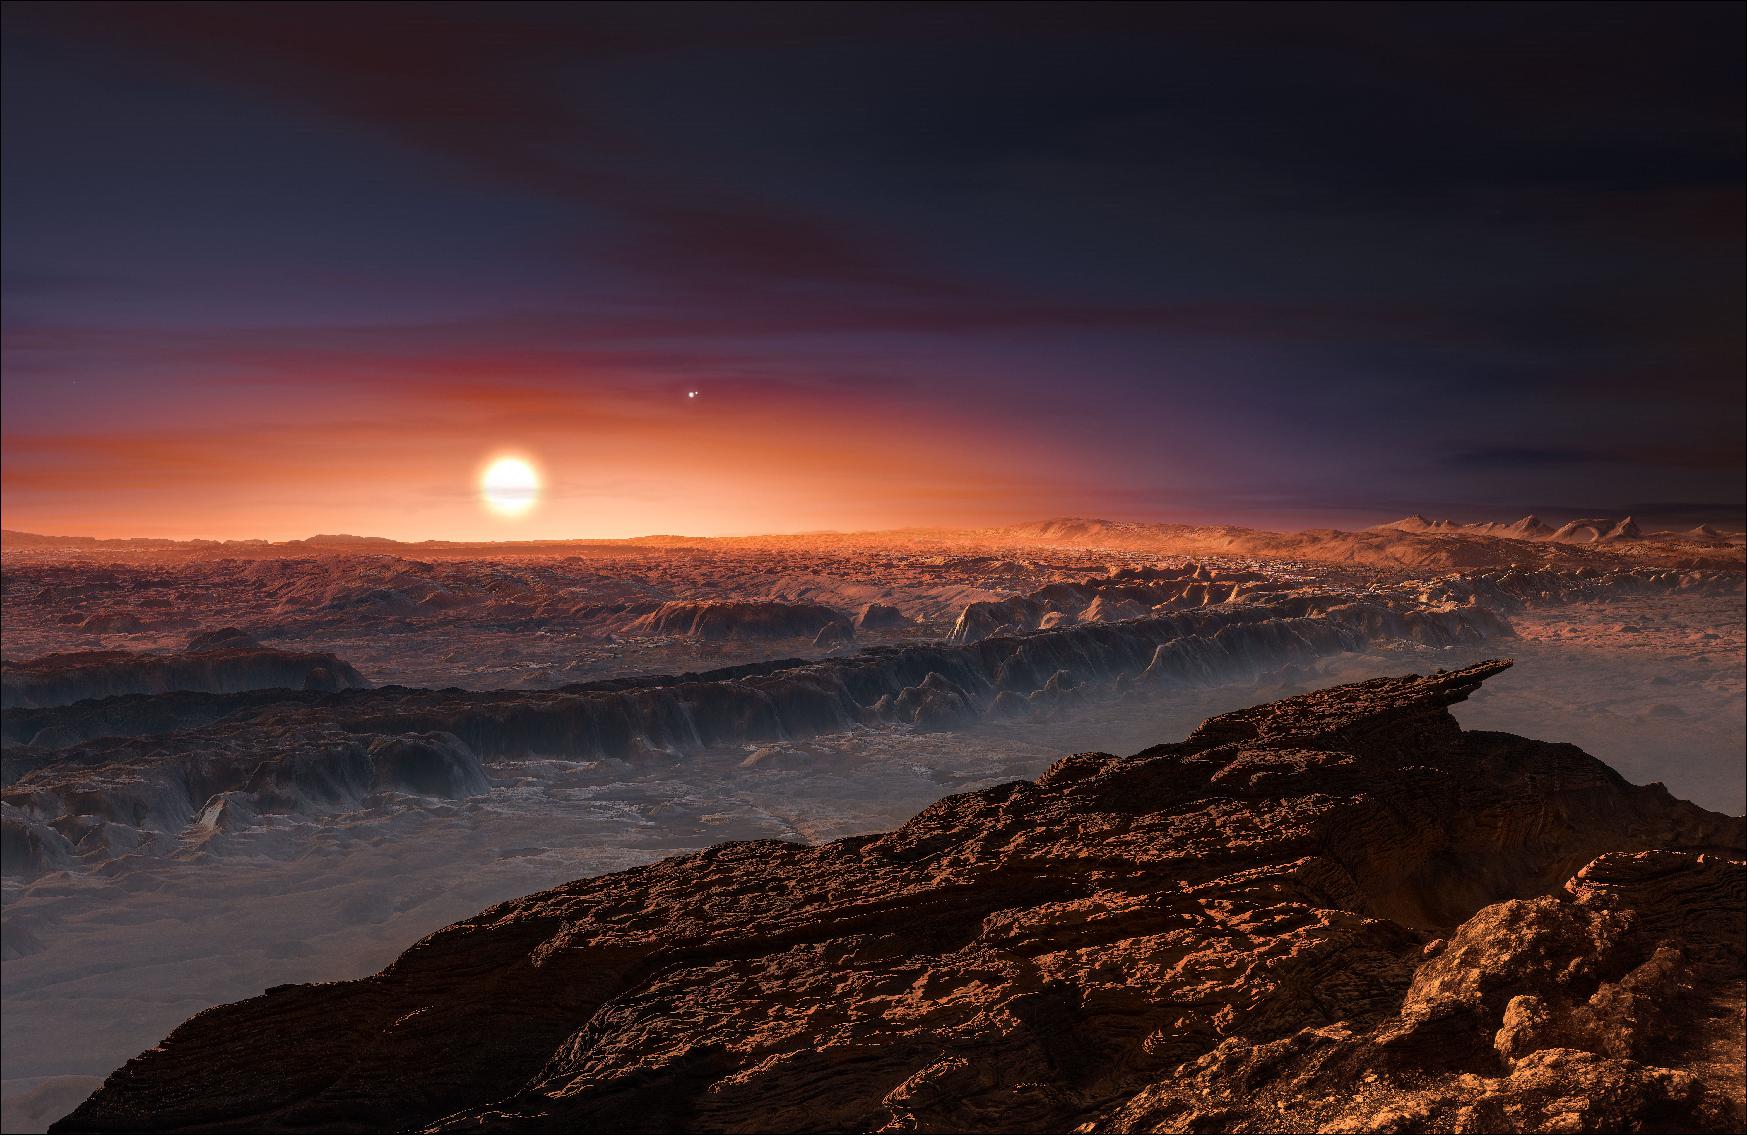 Figure 35: This artist’s impression shows a view of the surface of the planet Proxima b orbiting the red dwarf star Proxima Centauri, the closest star to the Solar System (image credit: ESO, M. Kornmesser)